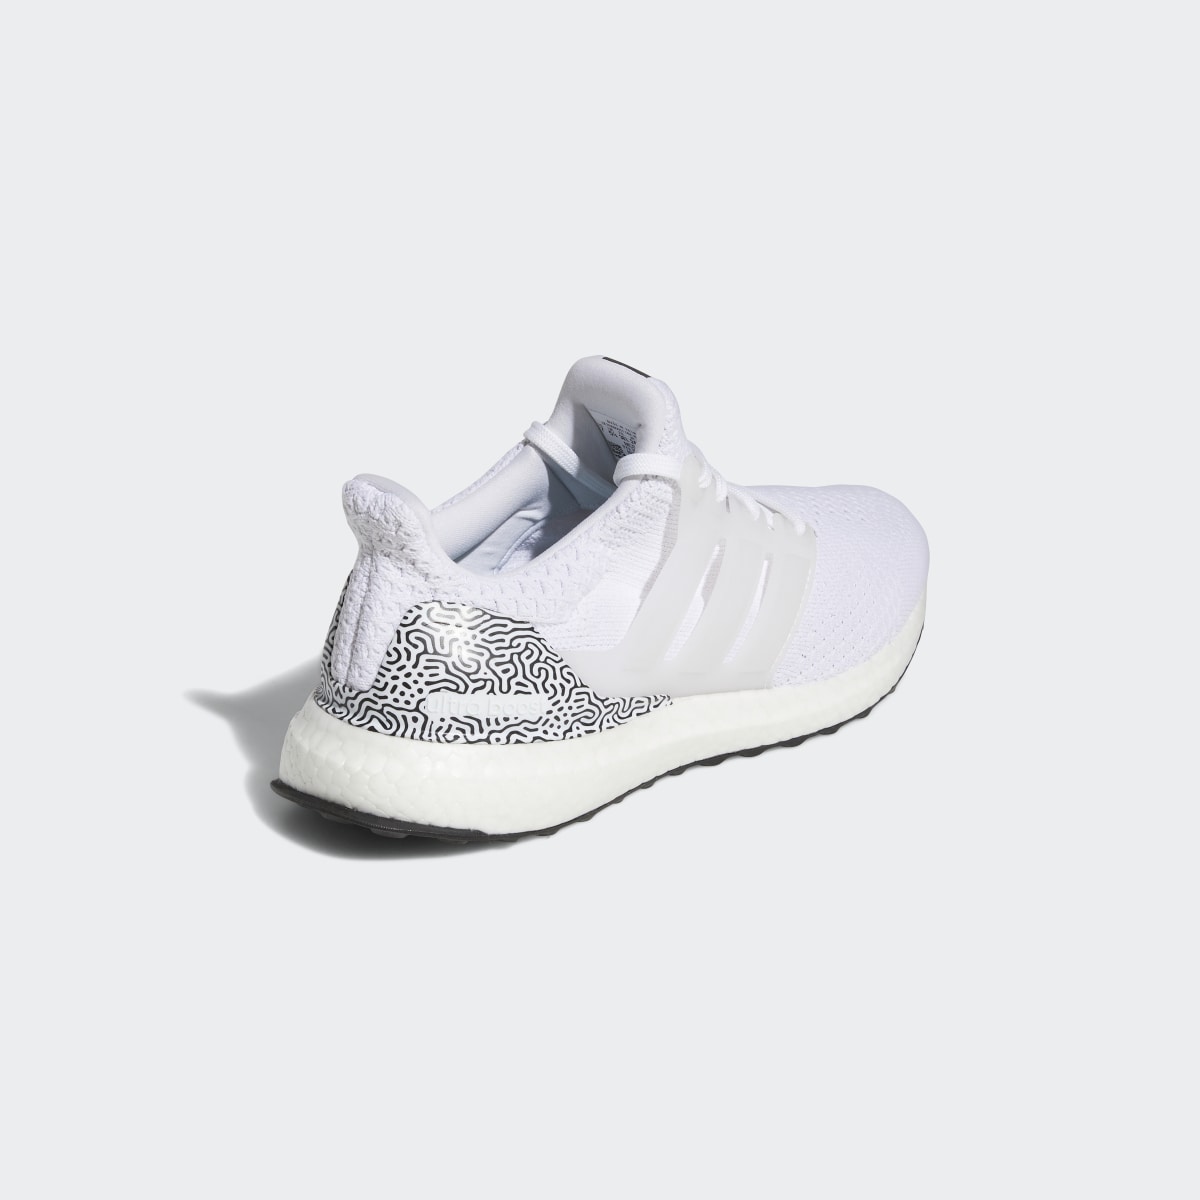 Adidas ULTRABOOST DNA SHOES. 9